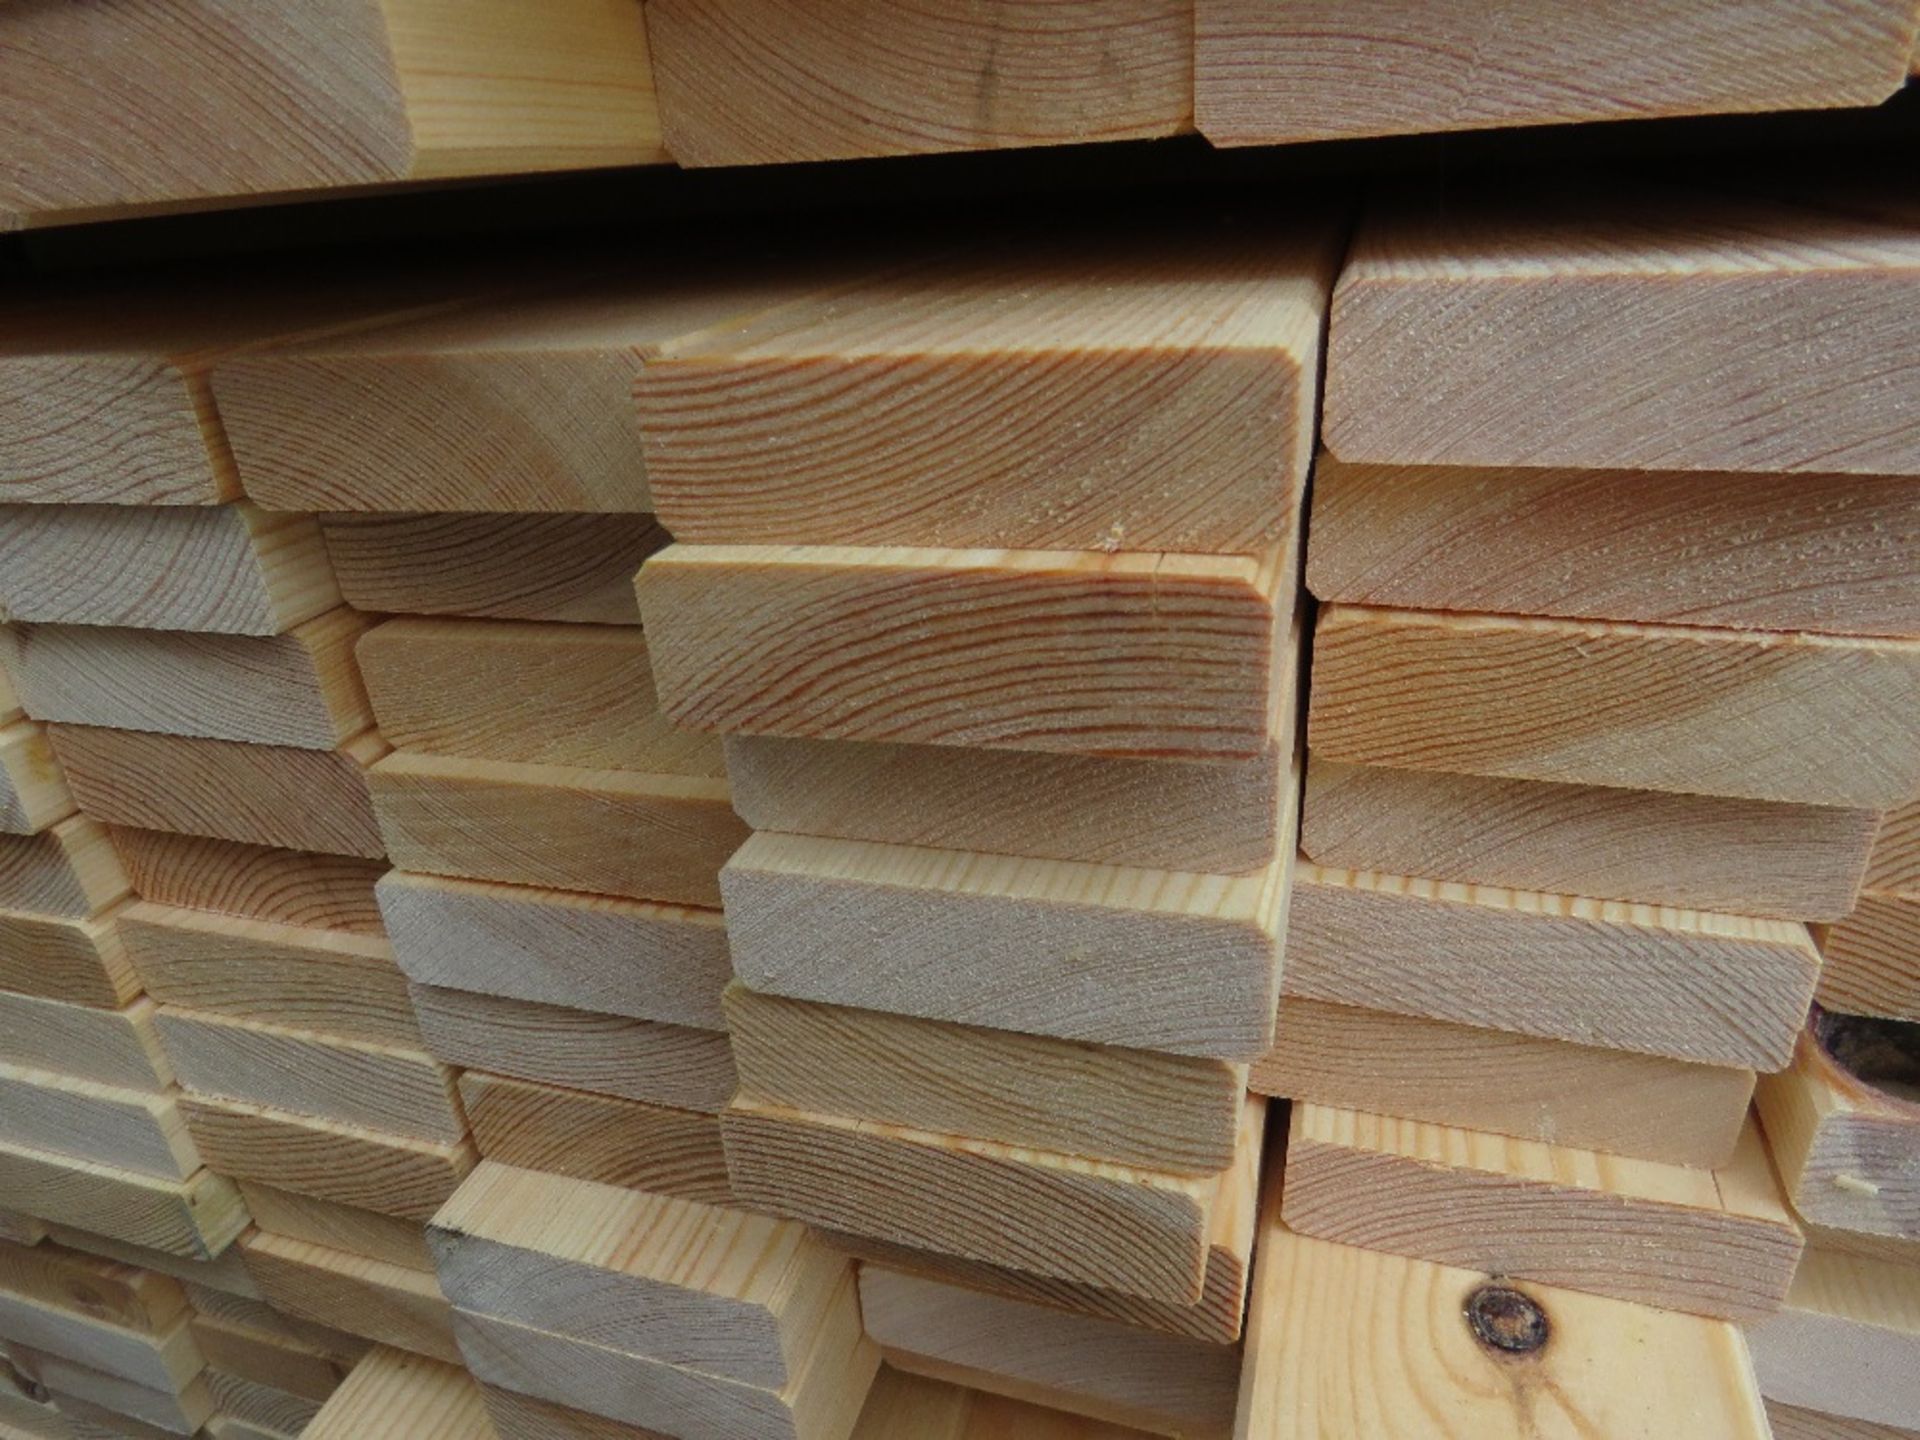 EXTRA LARGE PACK OF MACHINED TIMBER SLATS / BOARDS, UNTREATED. 1.83M LENGTH X 70MM WIDTH X 20MM DEPT - Image 3 of 4